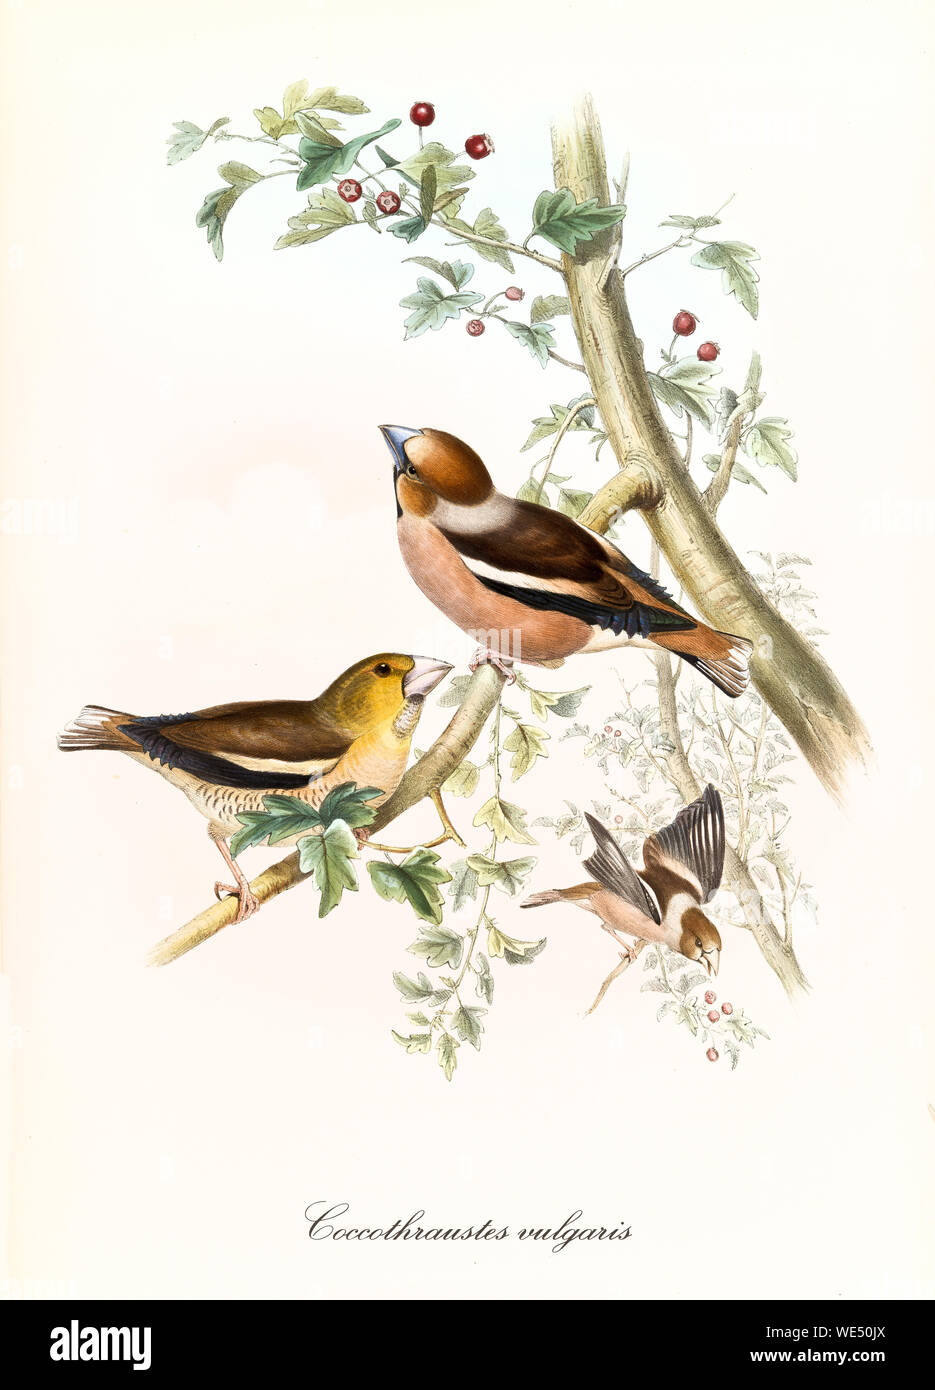 Little cute birds flying and posing on a robust branch with leaves and red berries. Vintage hand colored illustration of Hawfinch (Coccothraustes coccothraustes). By John Gould, London 1862 - 1873 Stock Photo